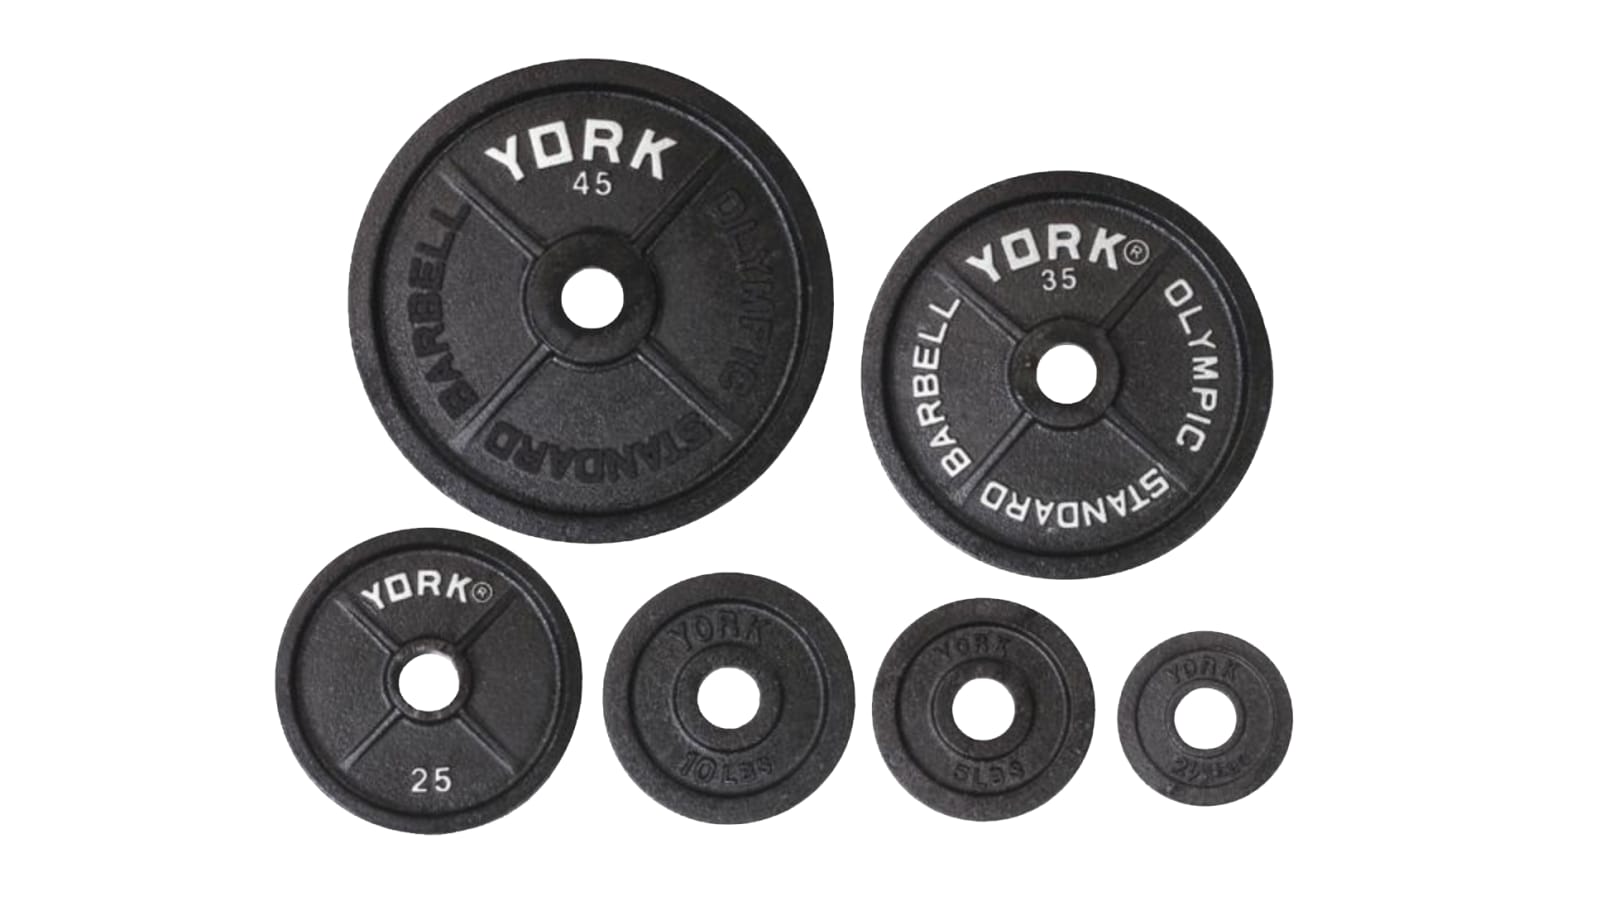 45 LB Cast Iron Olympic Plates, Sold Individually, Classic Weight